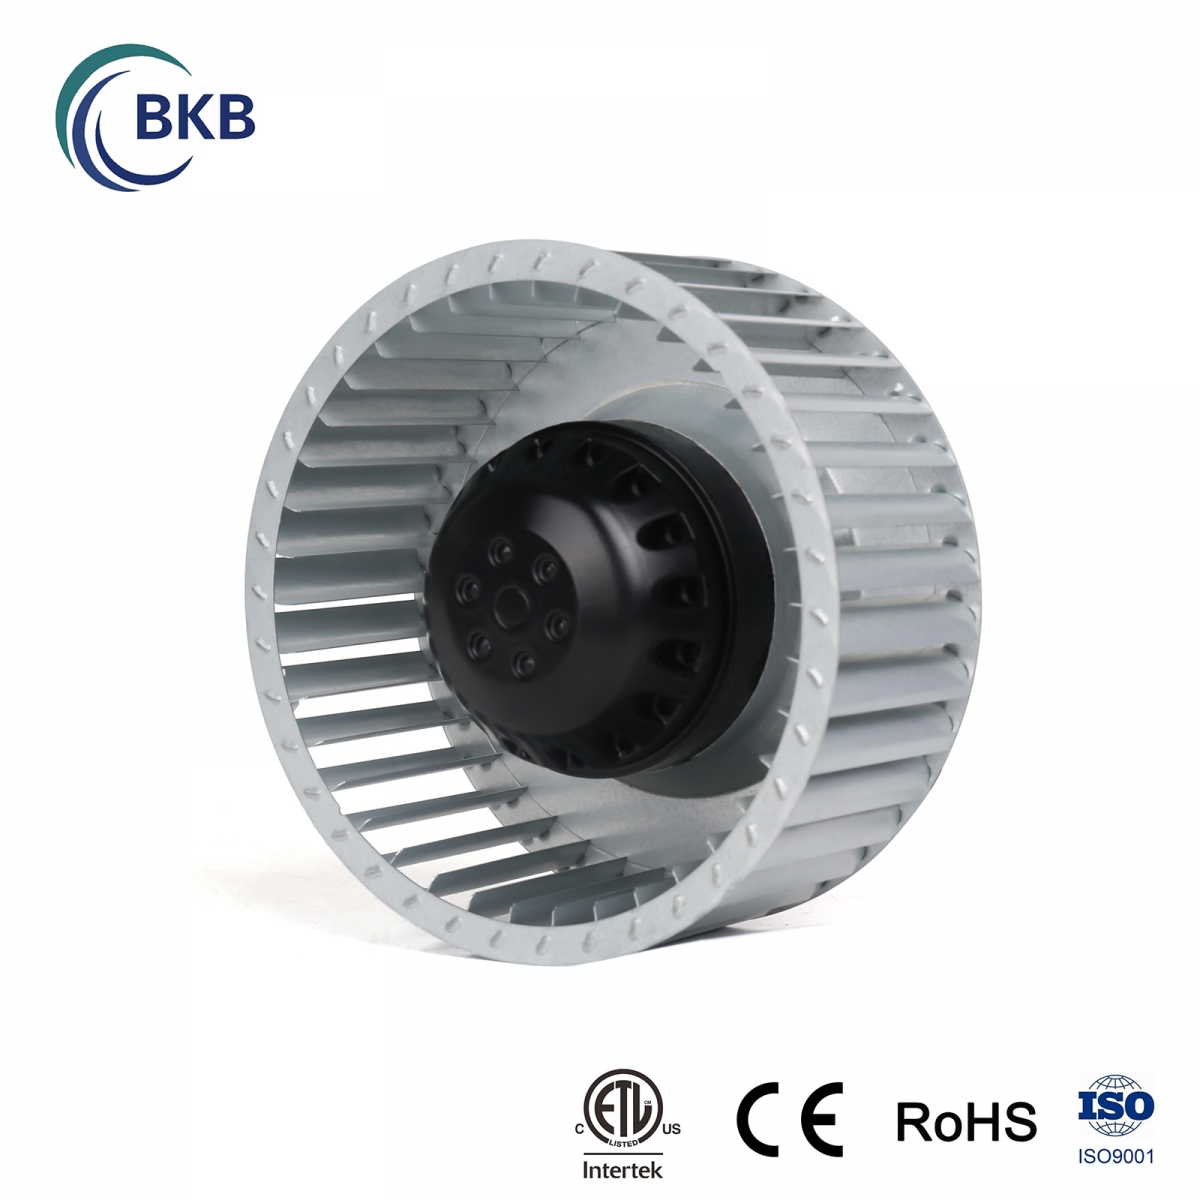 Steel forward curved centrifugal fan φ 160 supplied by Manufacturer in China.-SUNLIGHT BLOWER,Centrifugal Fans, Inline Fans,Motors,Backward curved centrifugal fans ,Forward curved centrifugal fans ,inlet fans, EC fans